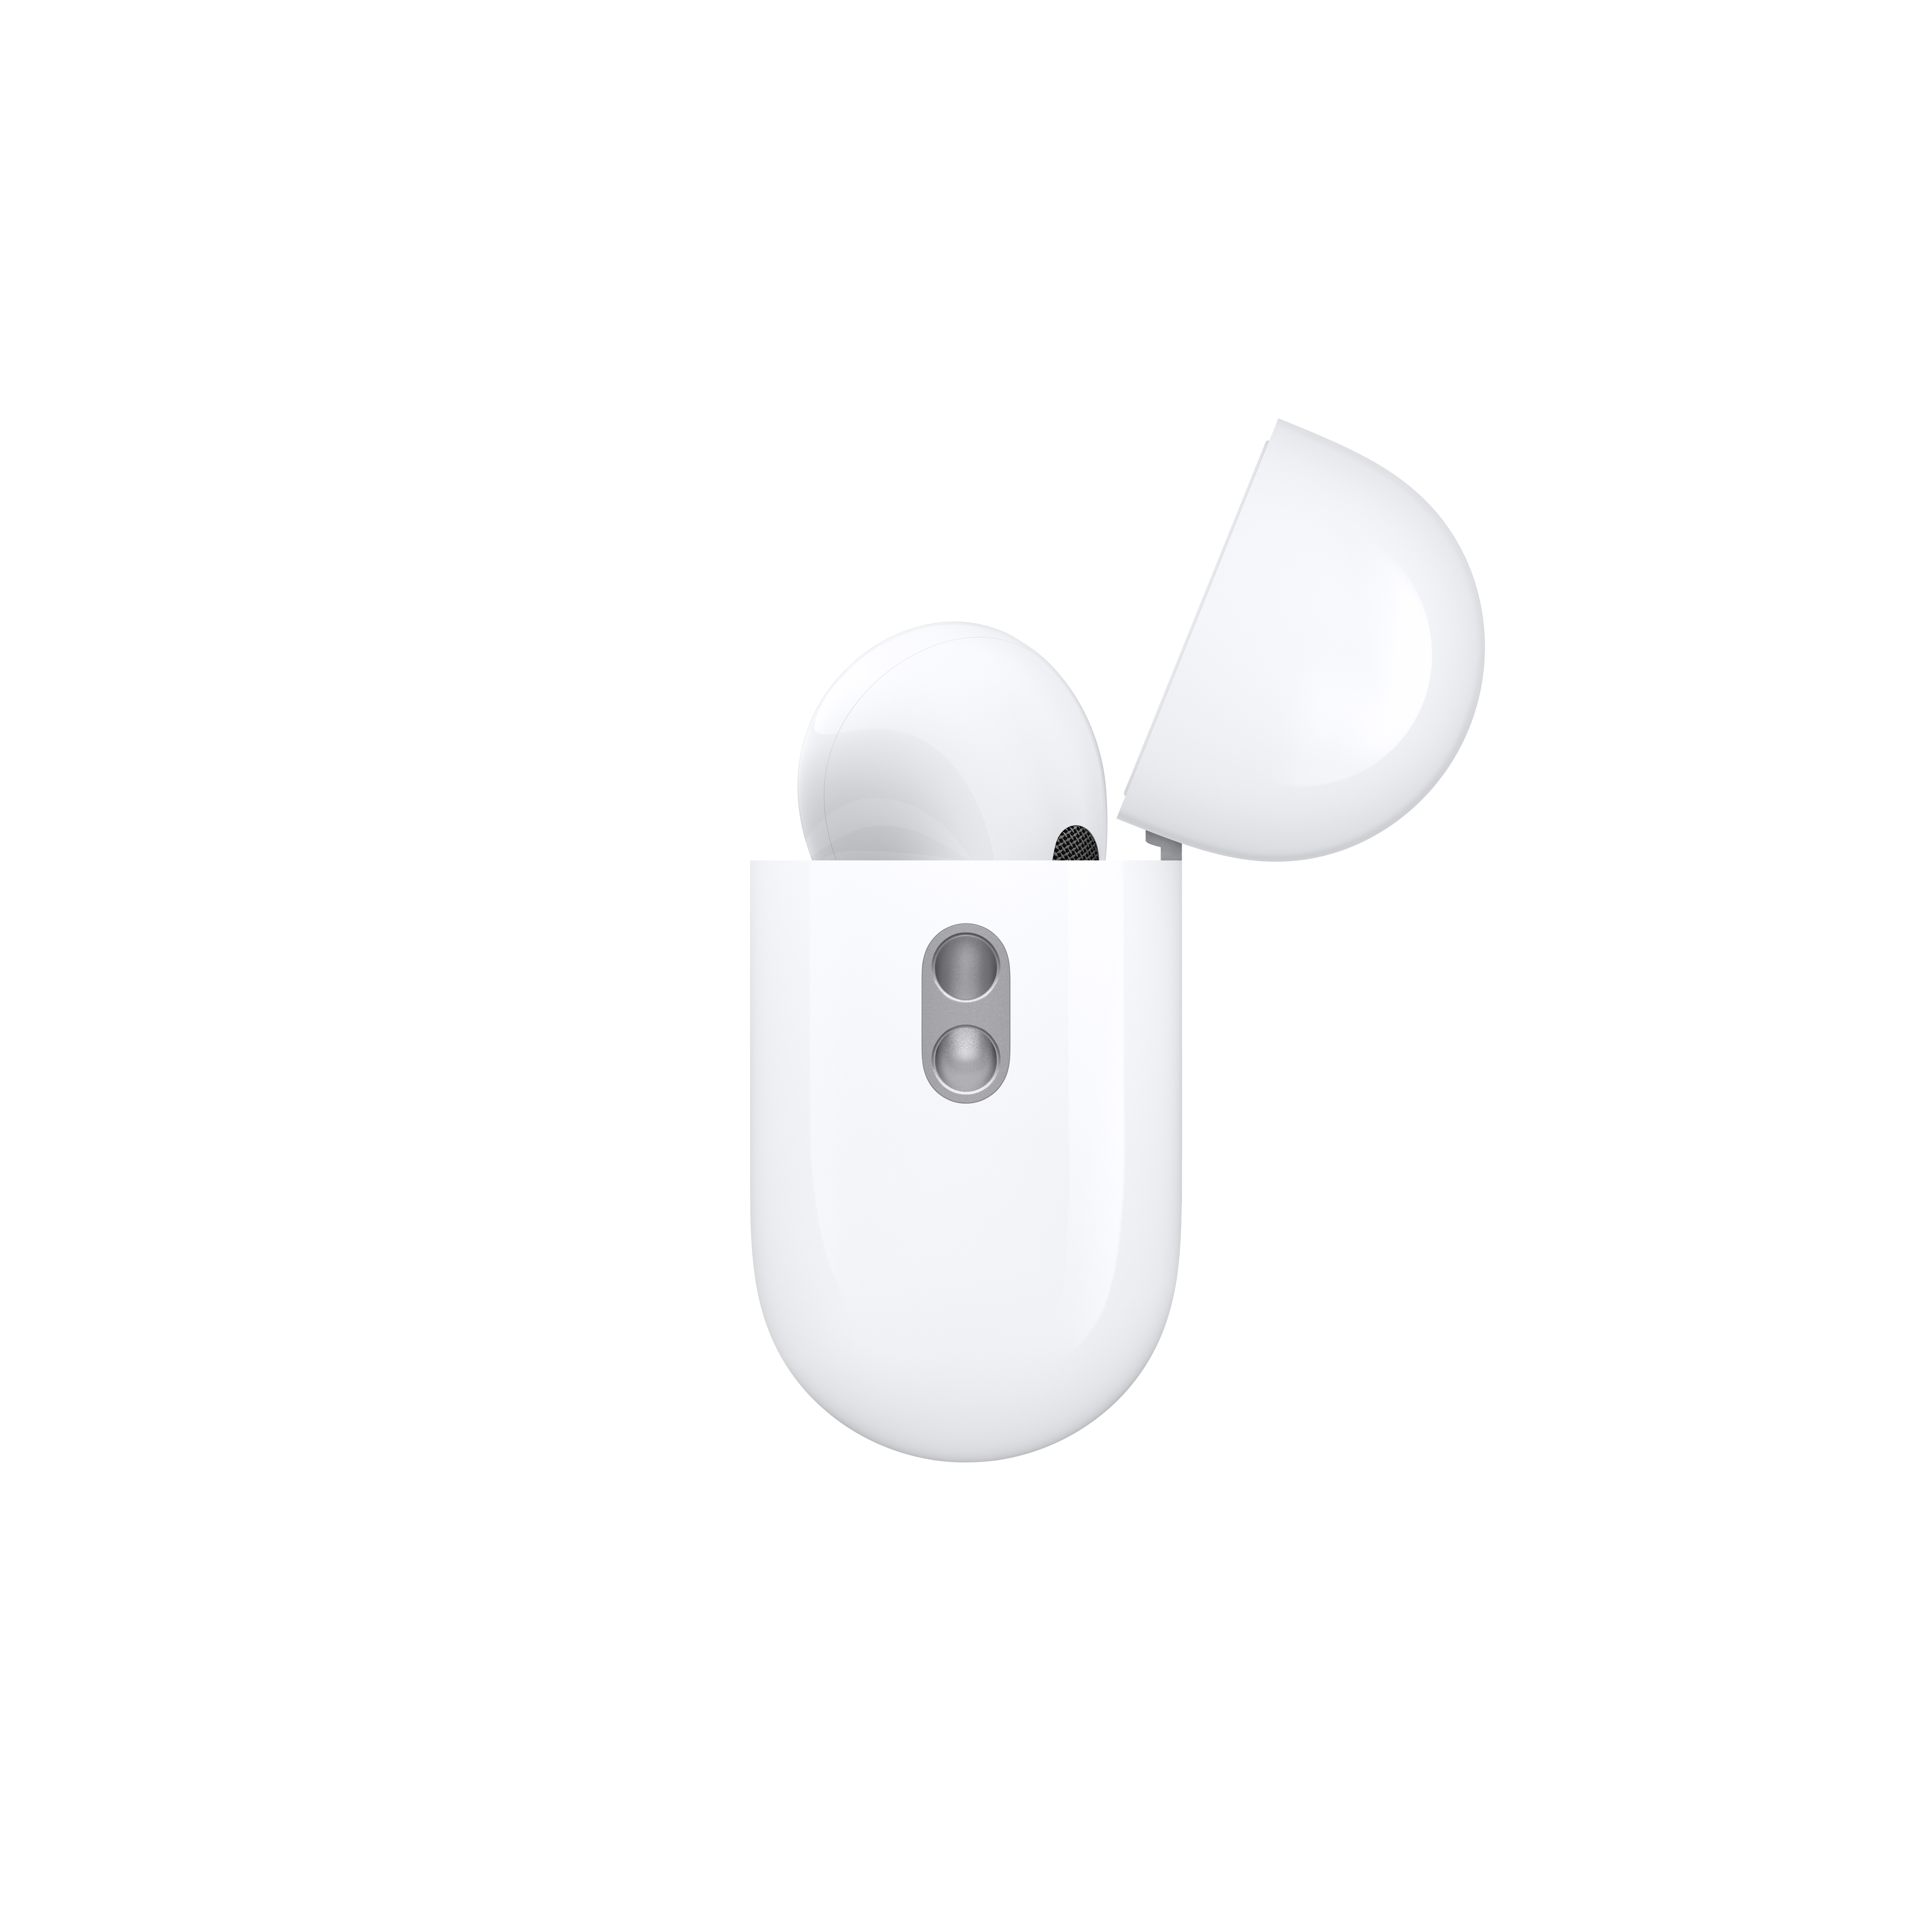 Airpods/Music :: Apple AirPods :: Airpod Pro 2 - With USB-C 